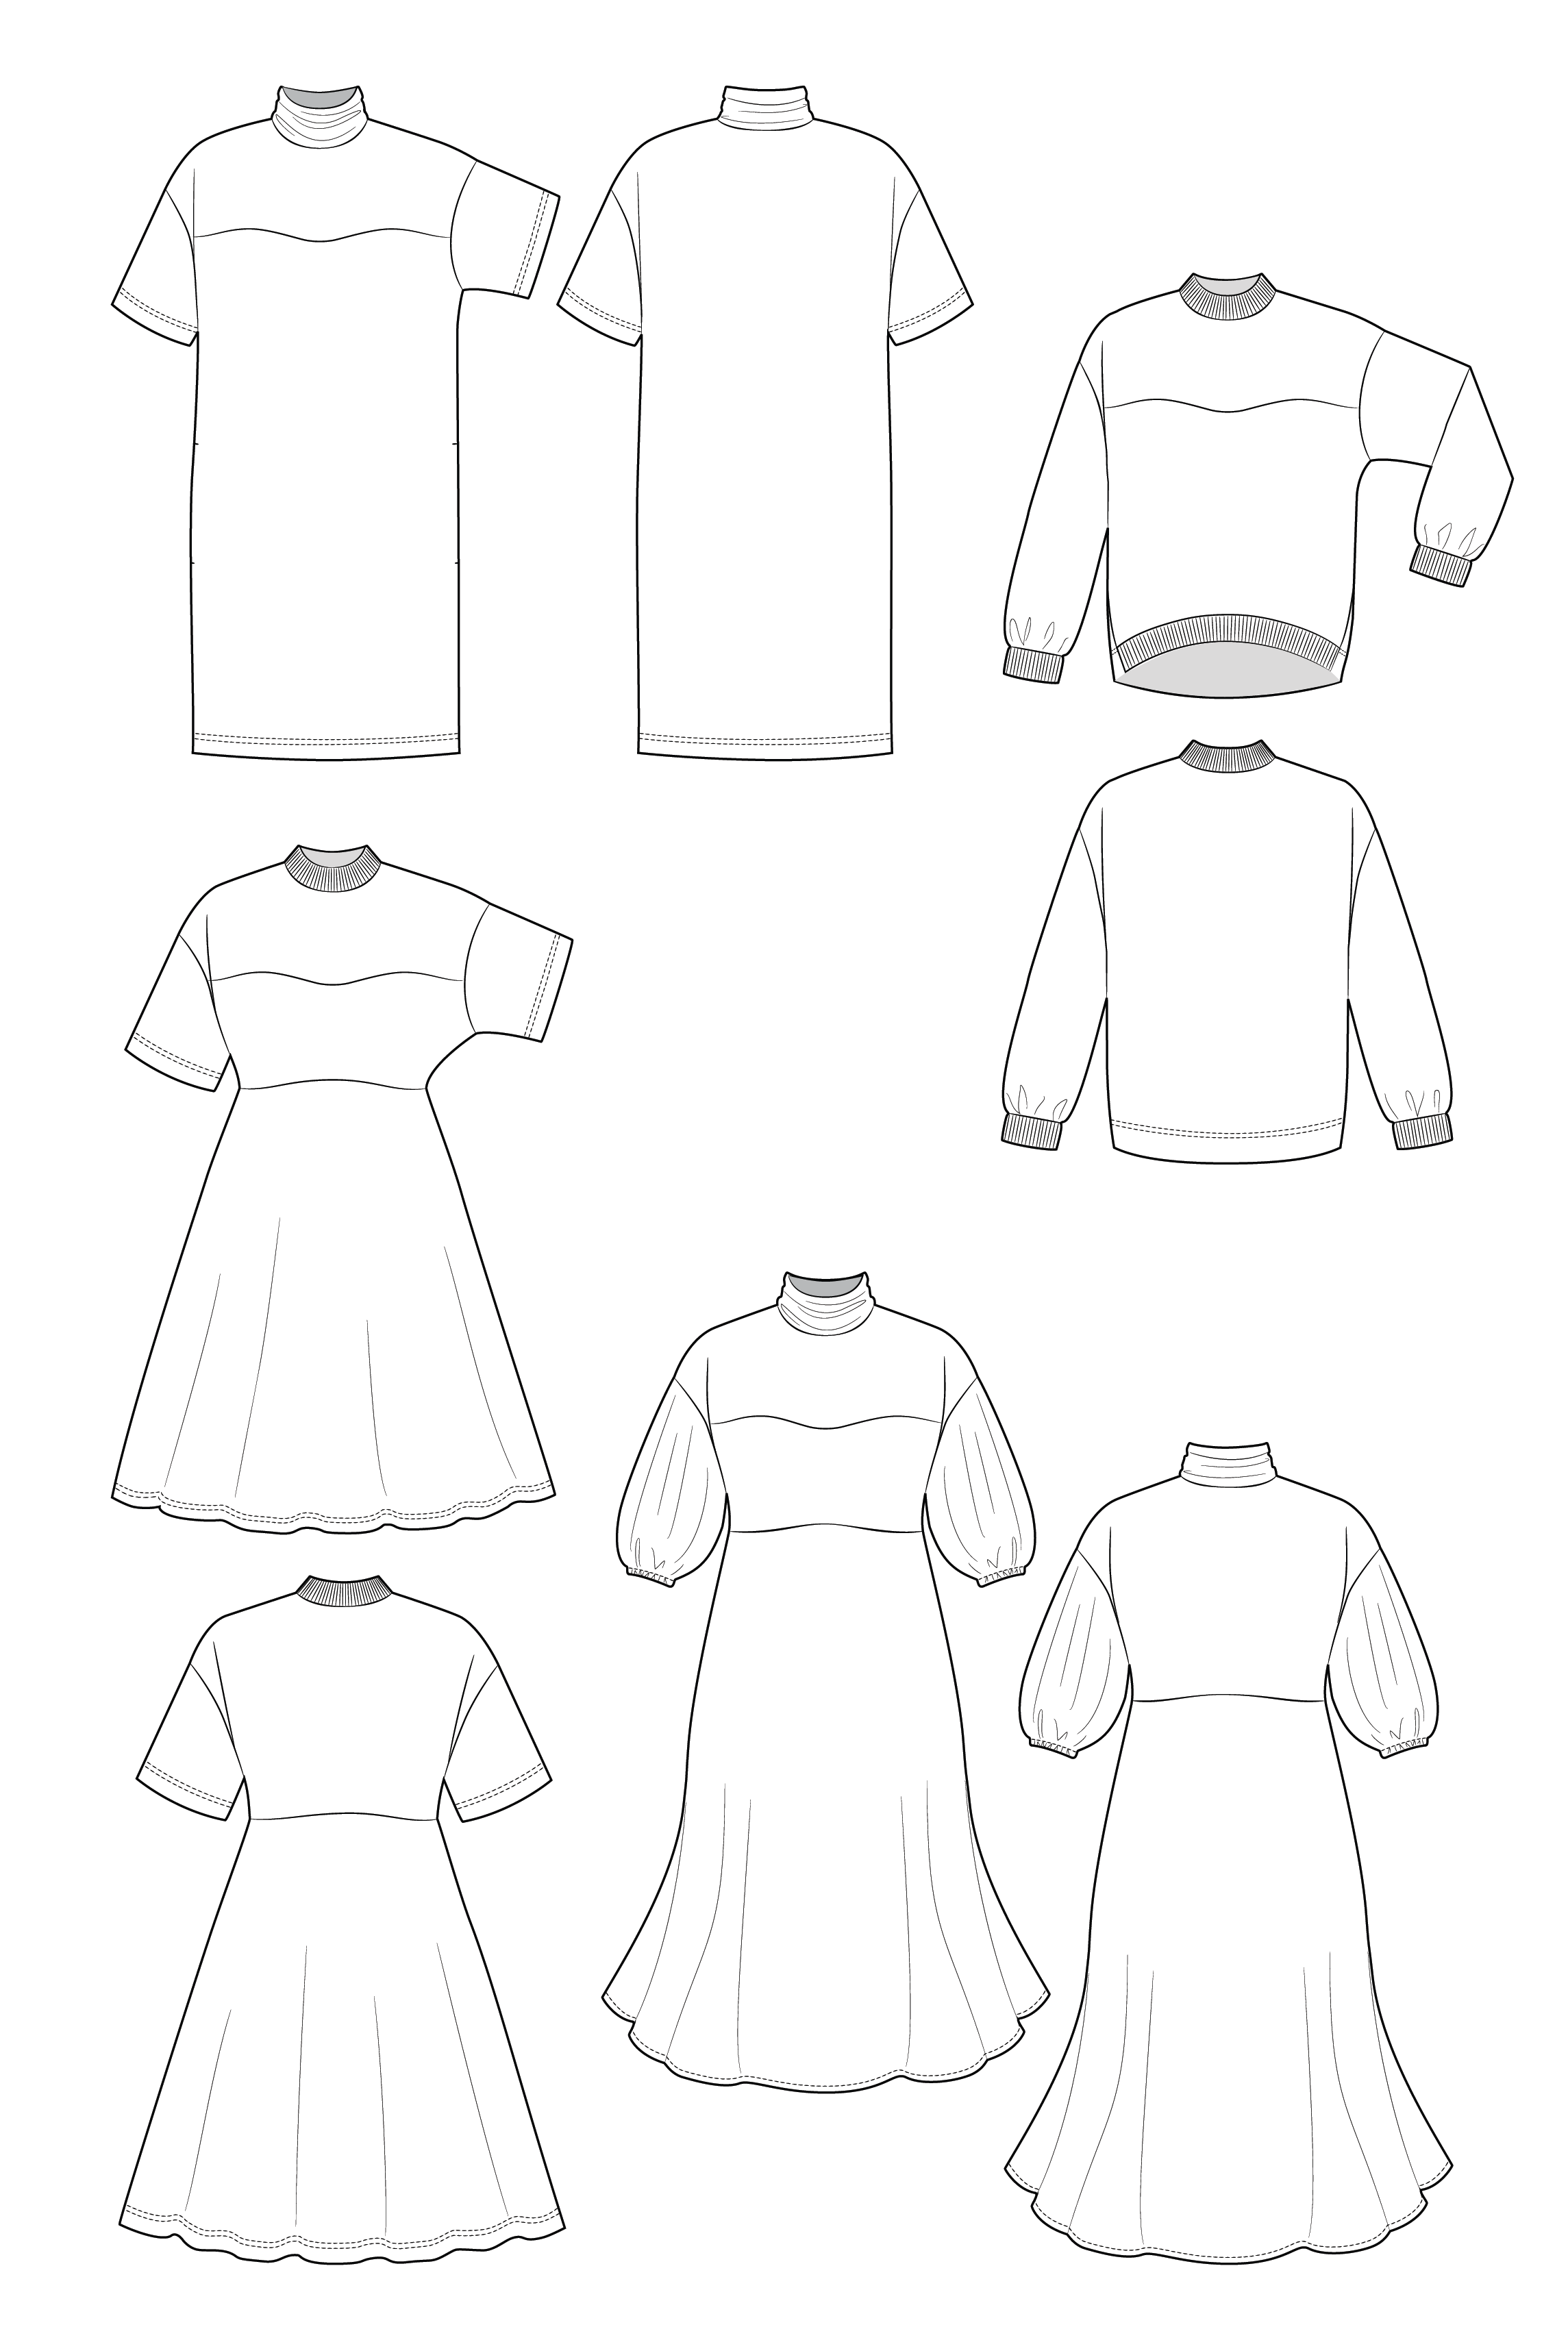 Named Clothing - Building The Pattern Sewing Book